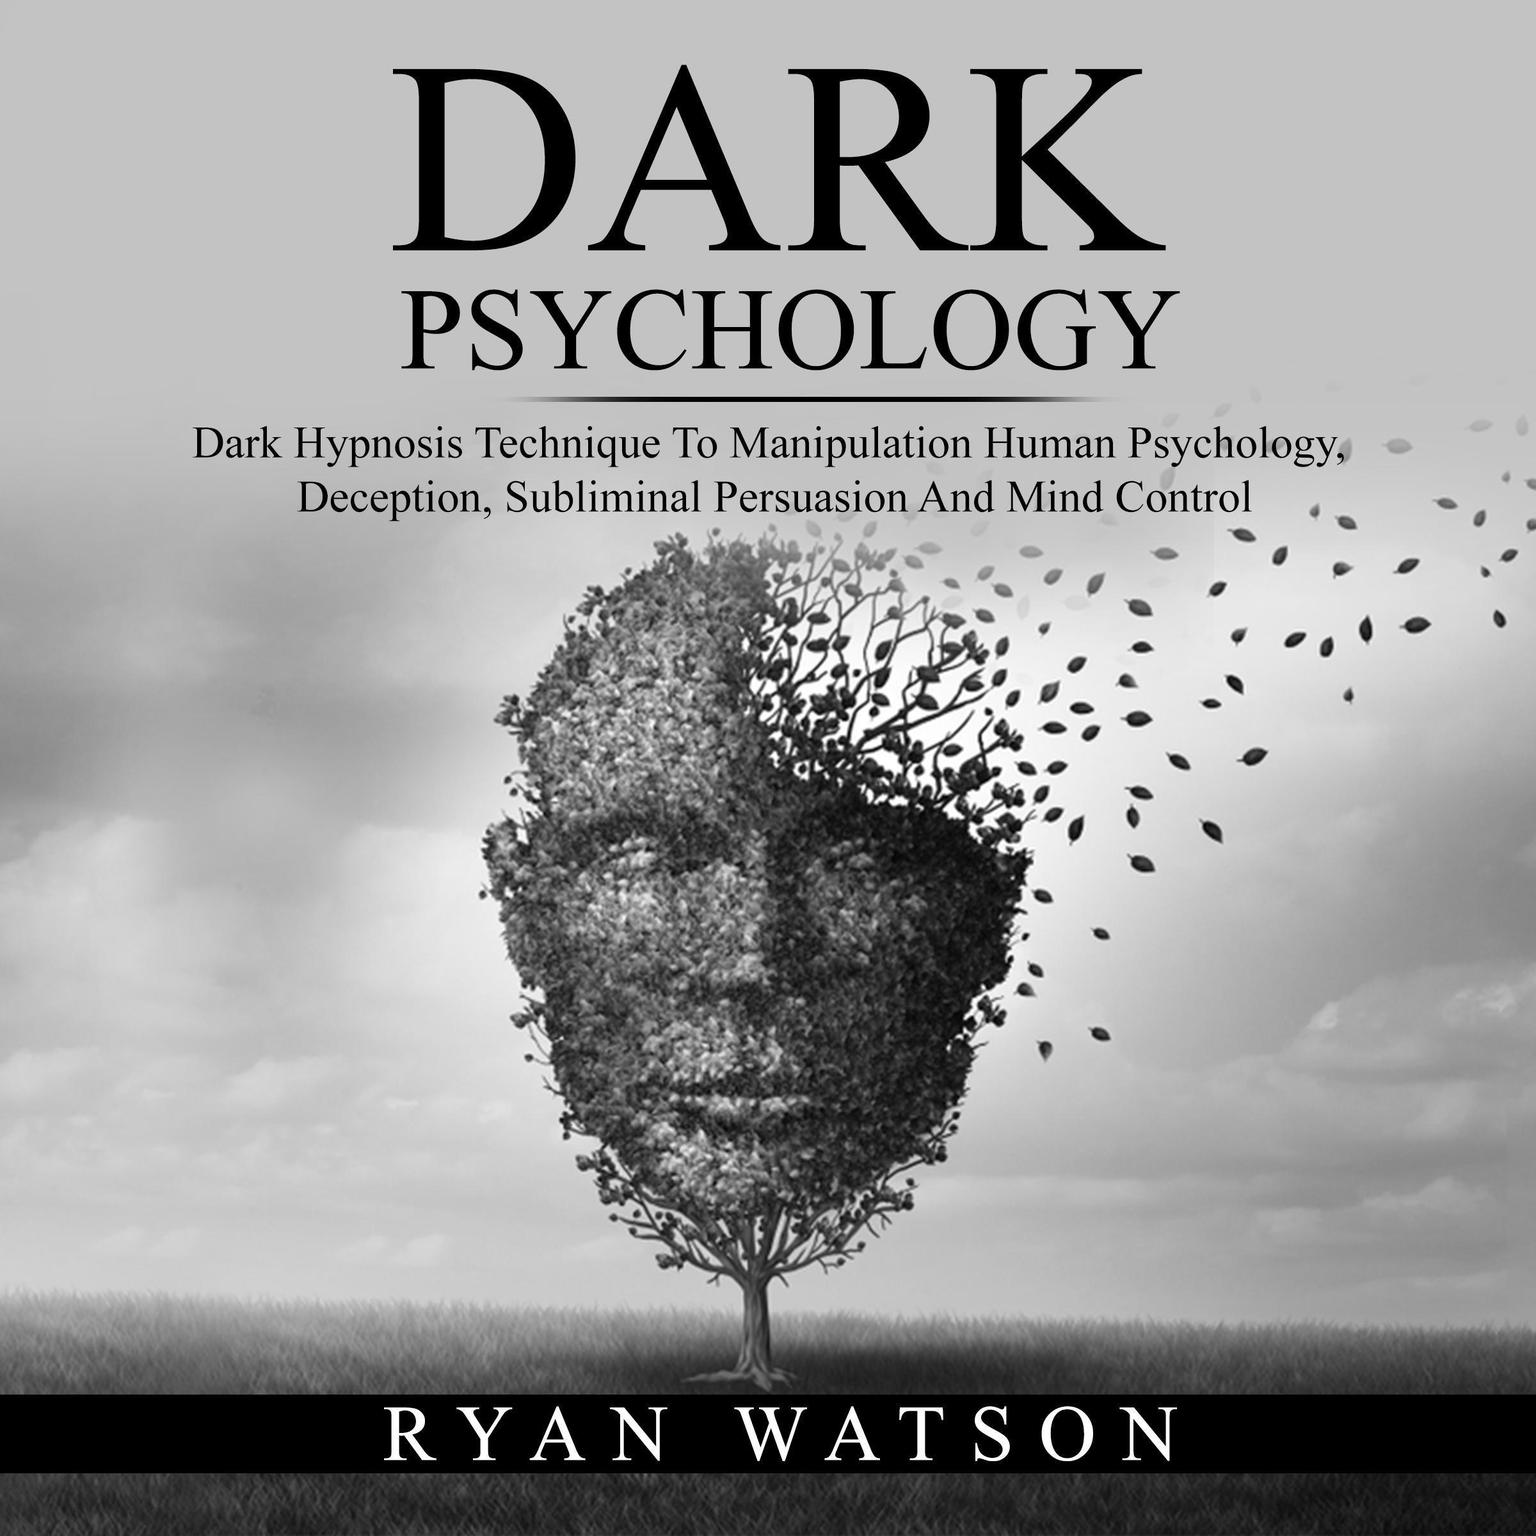 DARK PSYCHOLOGY: Dark Hypnosis Technique To Manipulation Human Psychology, Deception, Subliminal Persuasion And Mind Control Audiobook, by Ryan Watson